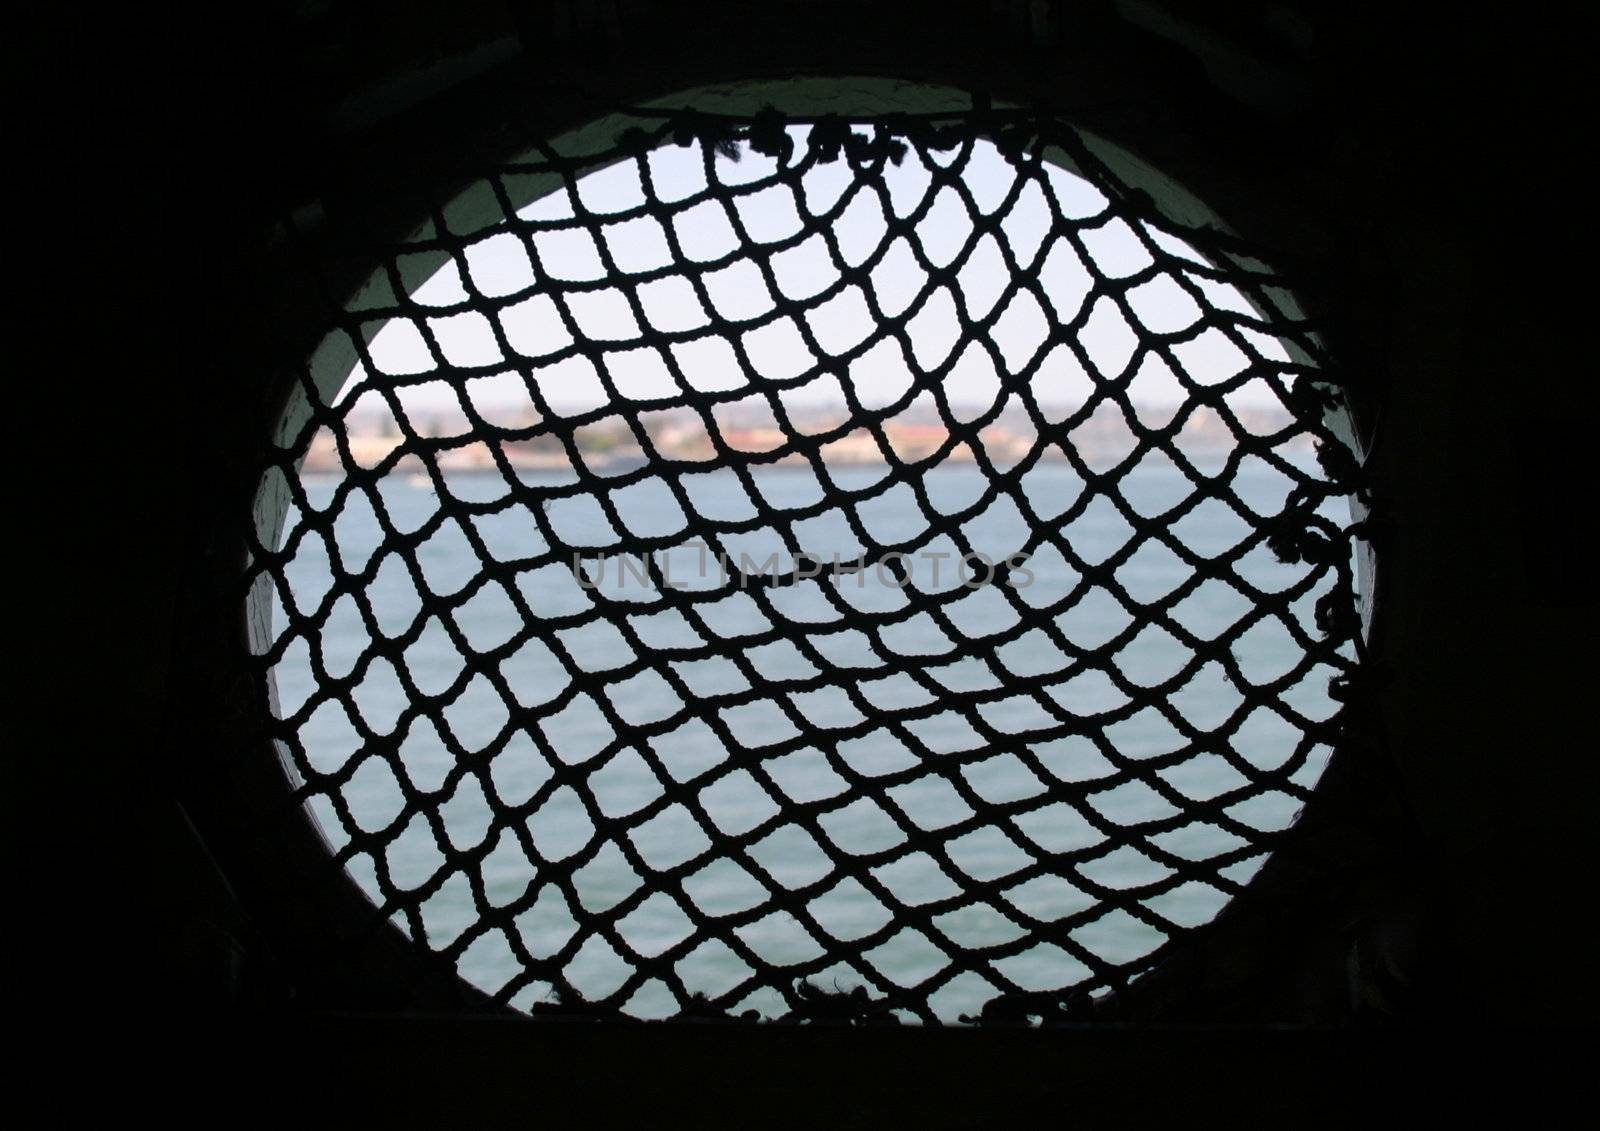 Looking out of a window on a ship.